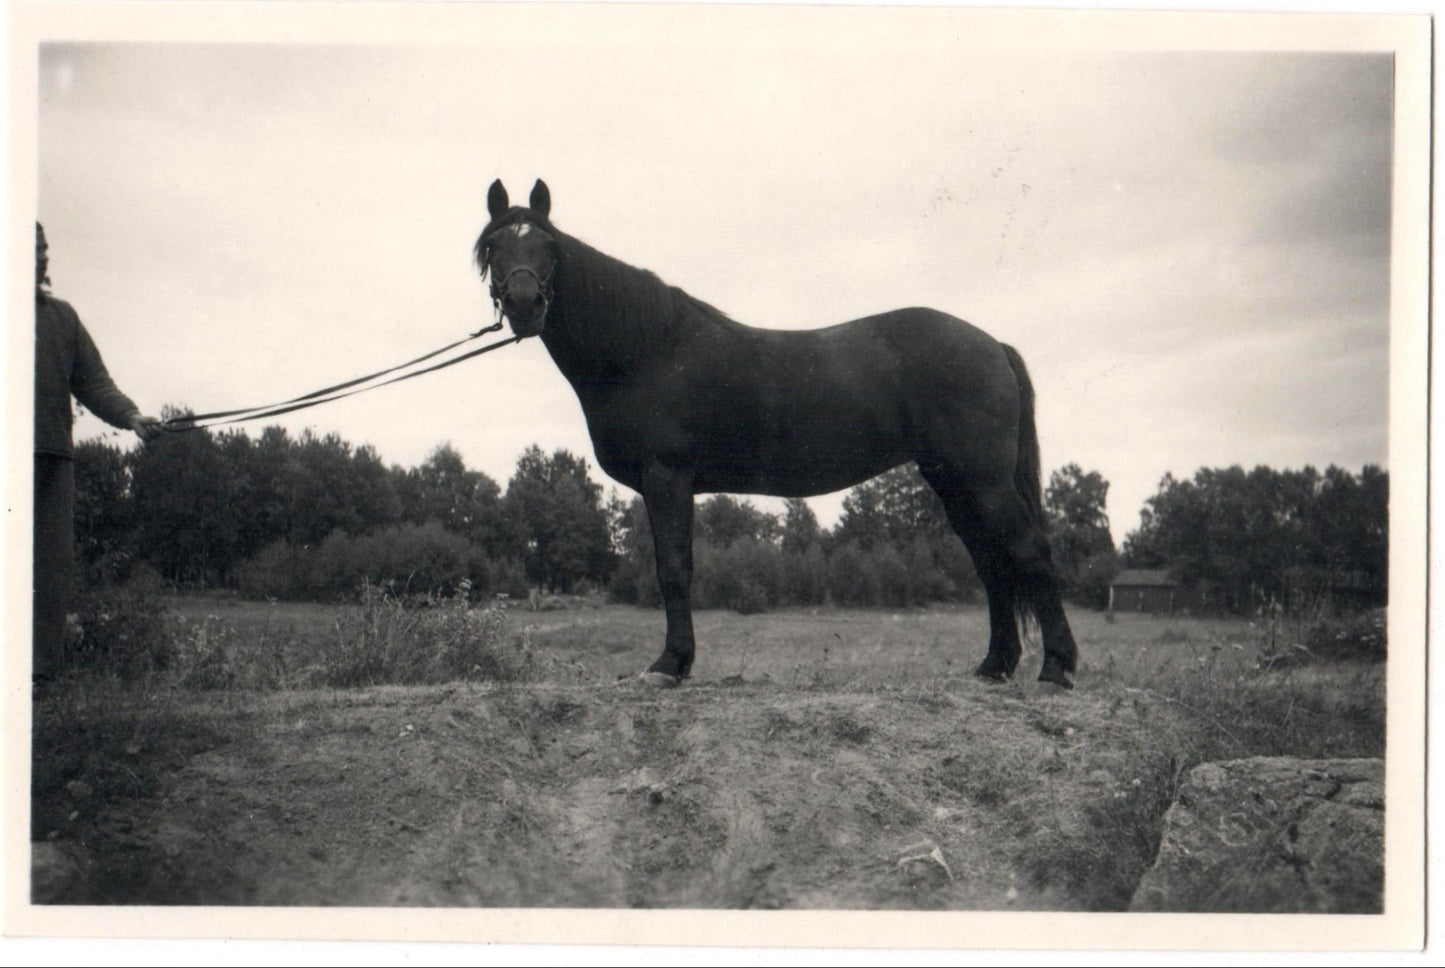 Vintage Photo - Photo of Black Horse - Sports Horse - Equestrian Sports - Sweden